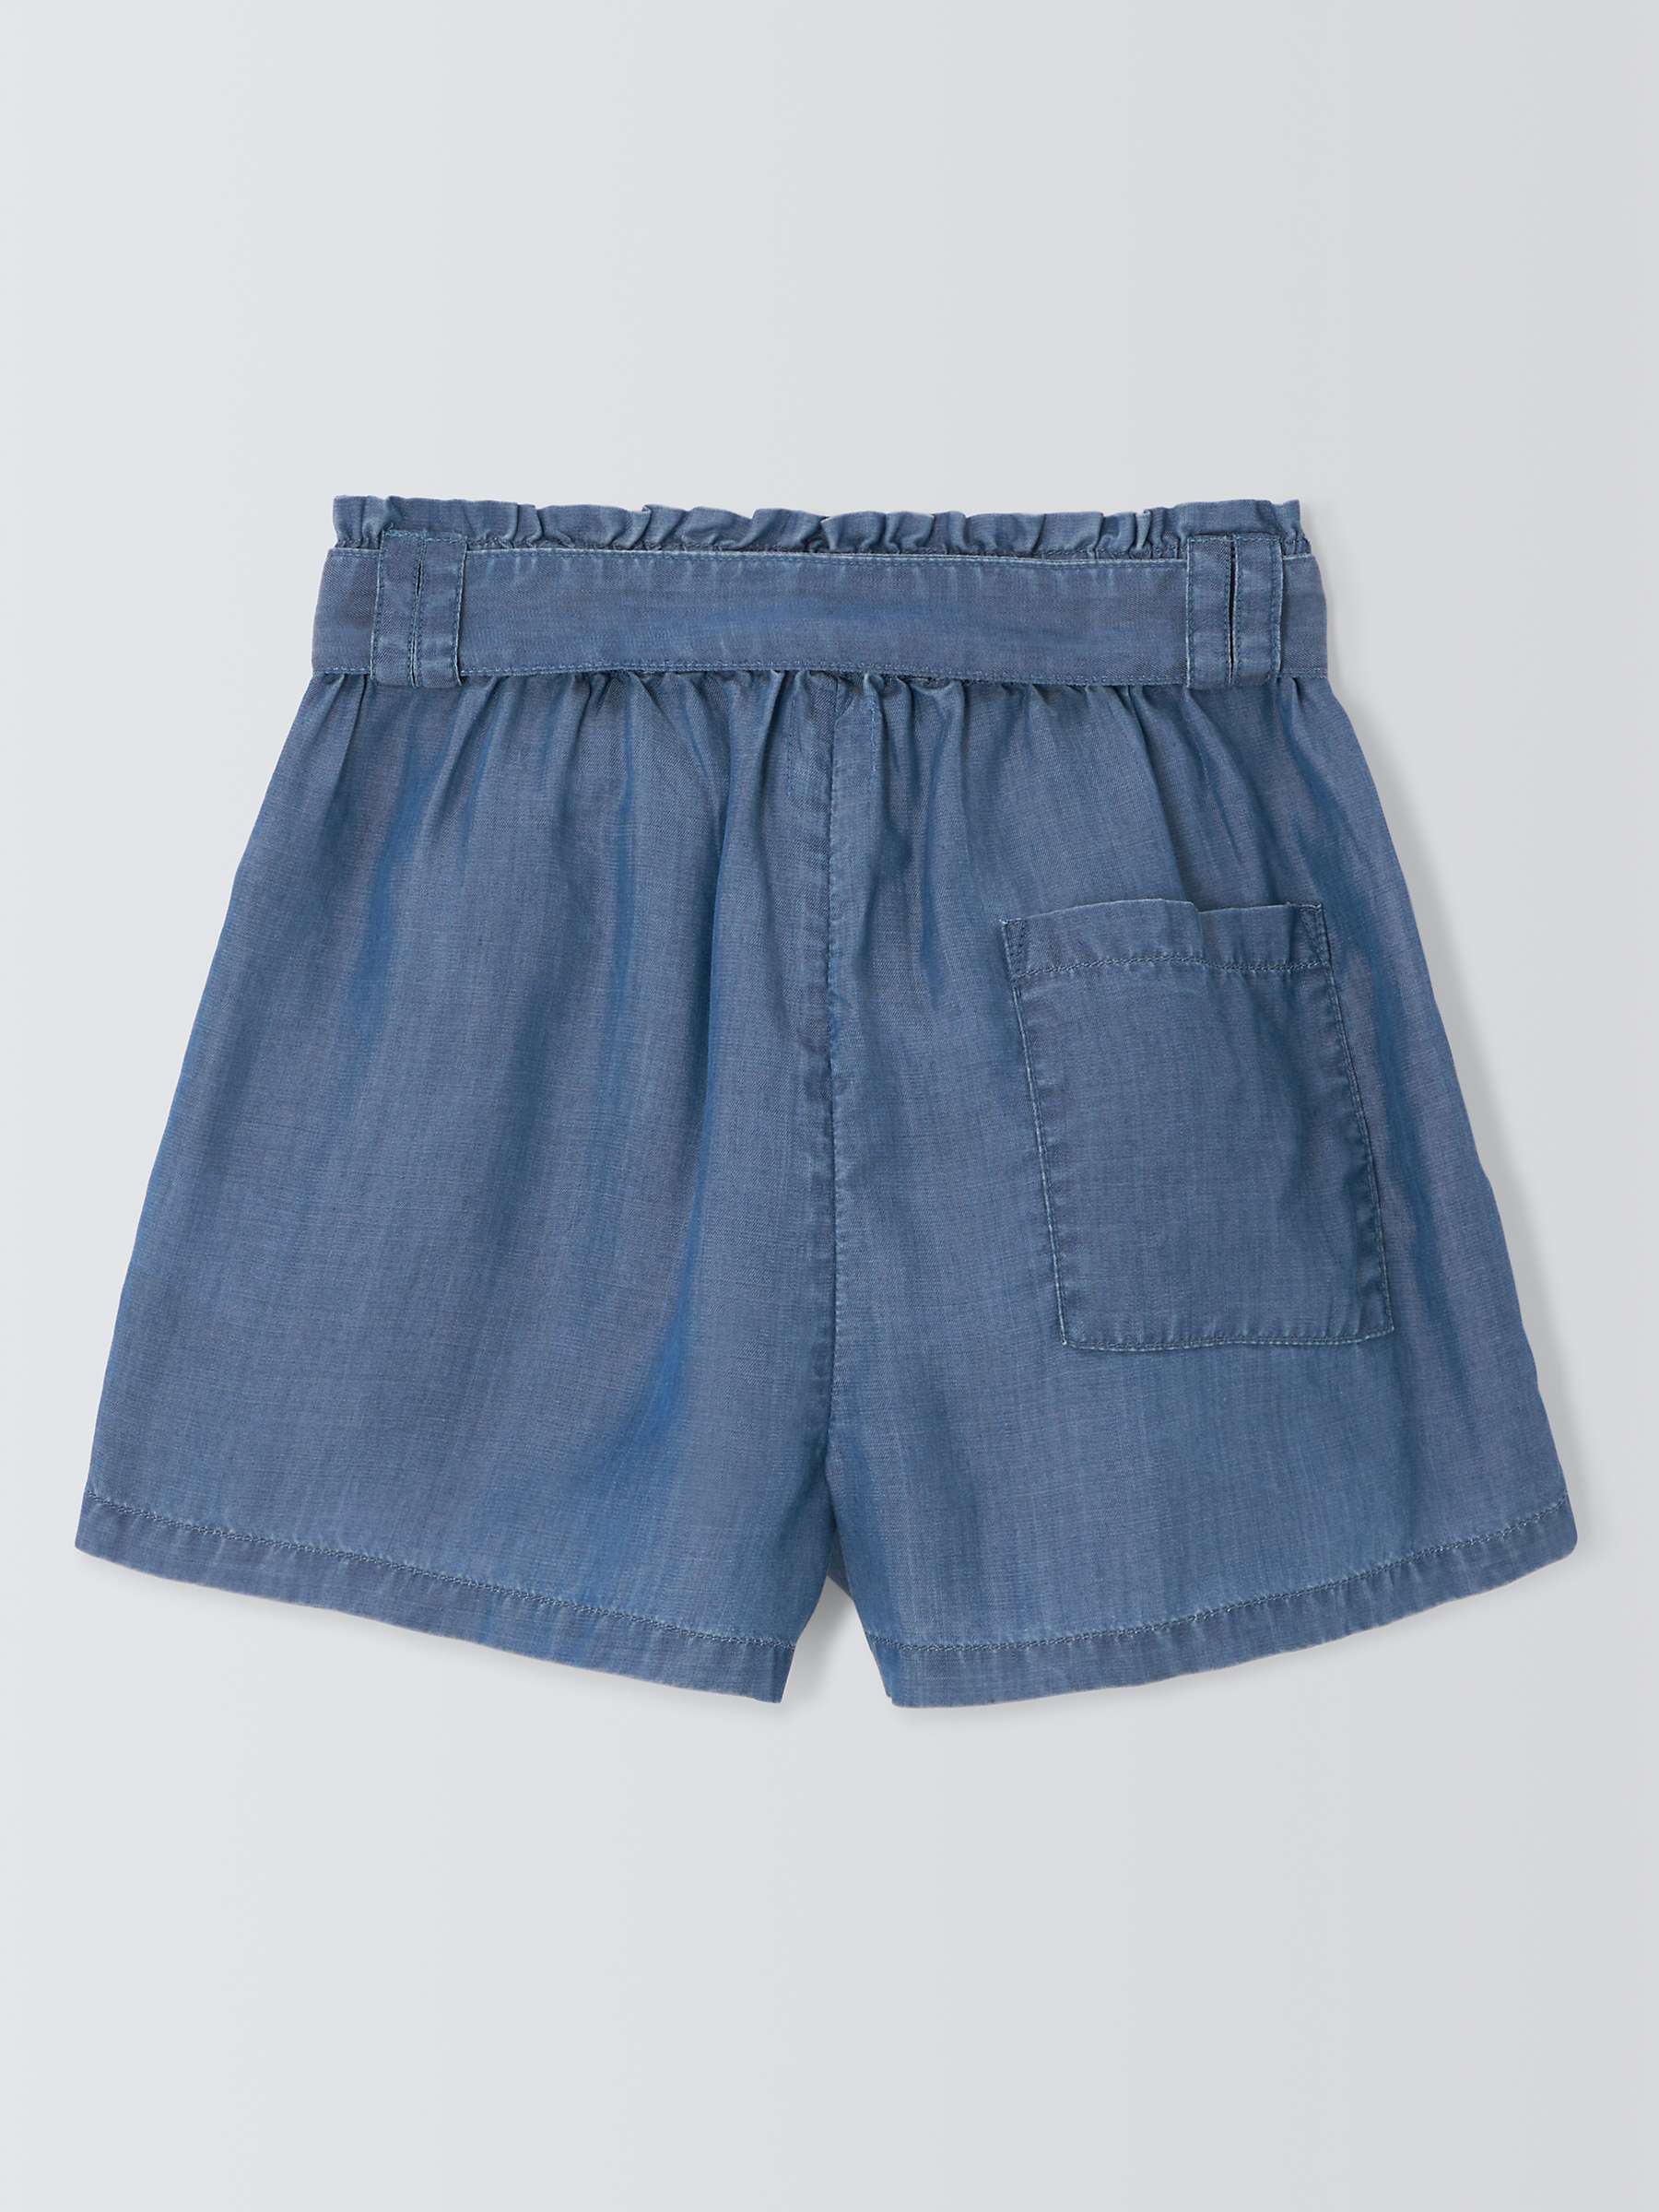 Buy John Lewis Kids' Chambray Tie Waist Shorts, Blue Chambray Online at johnlewis.com